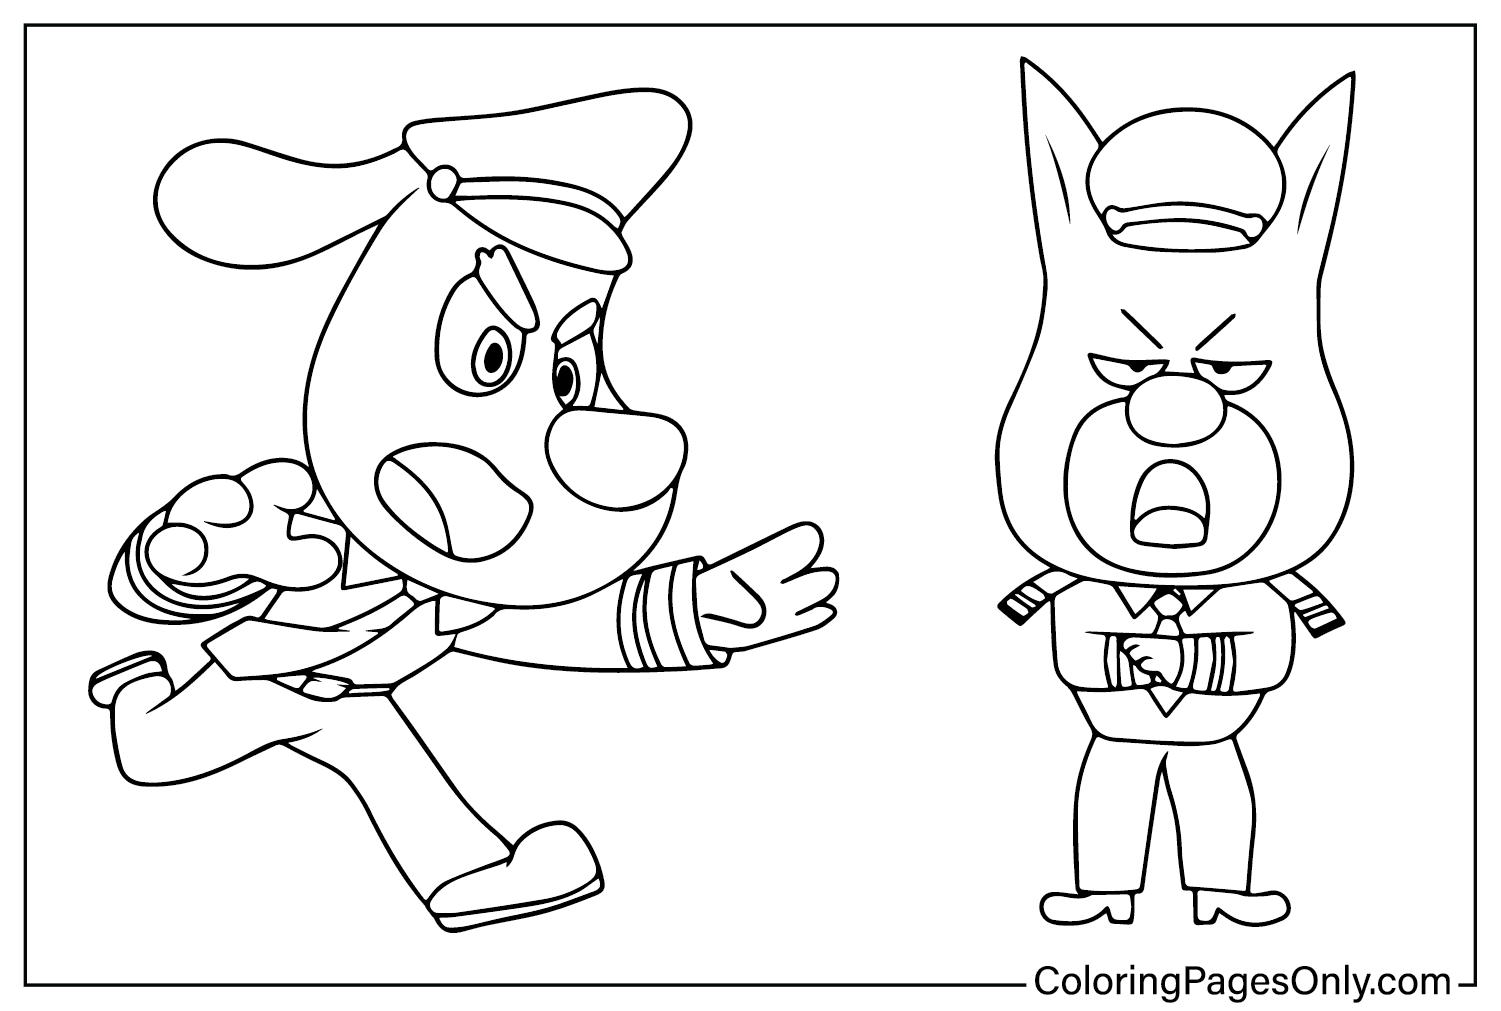 Safety Sheriff Labrador Coloring Sheet for Kids from Safety Sheriff Labrador